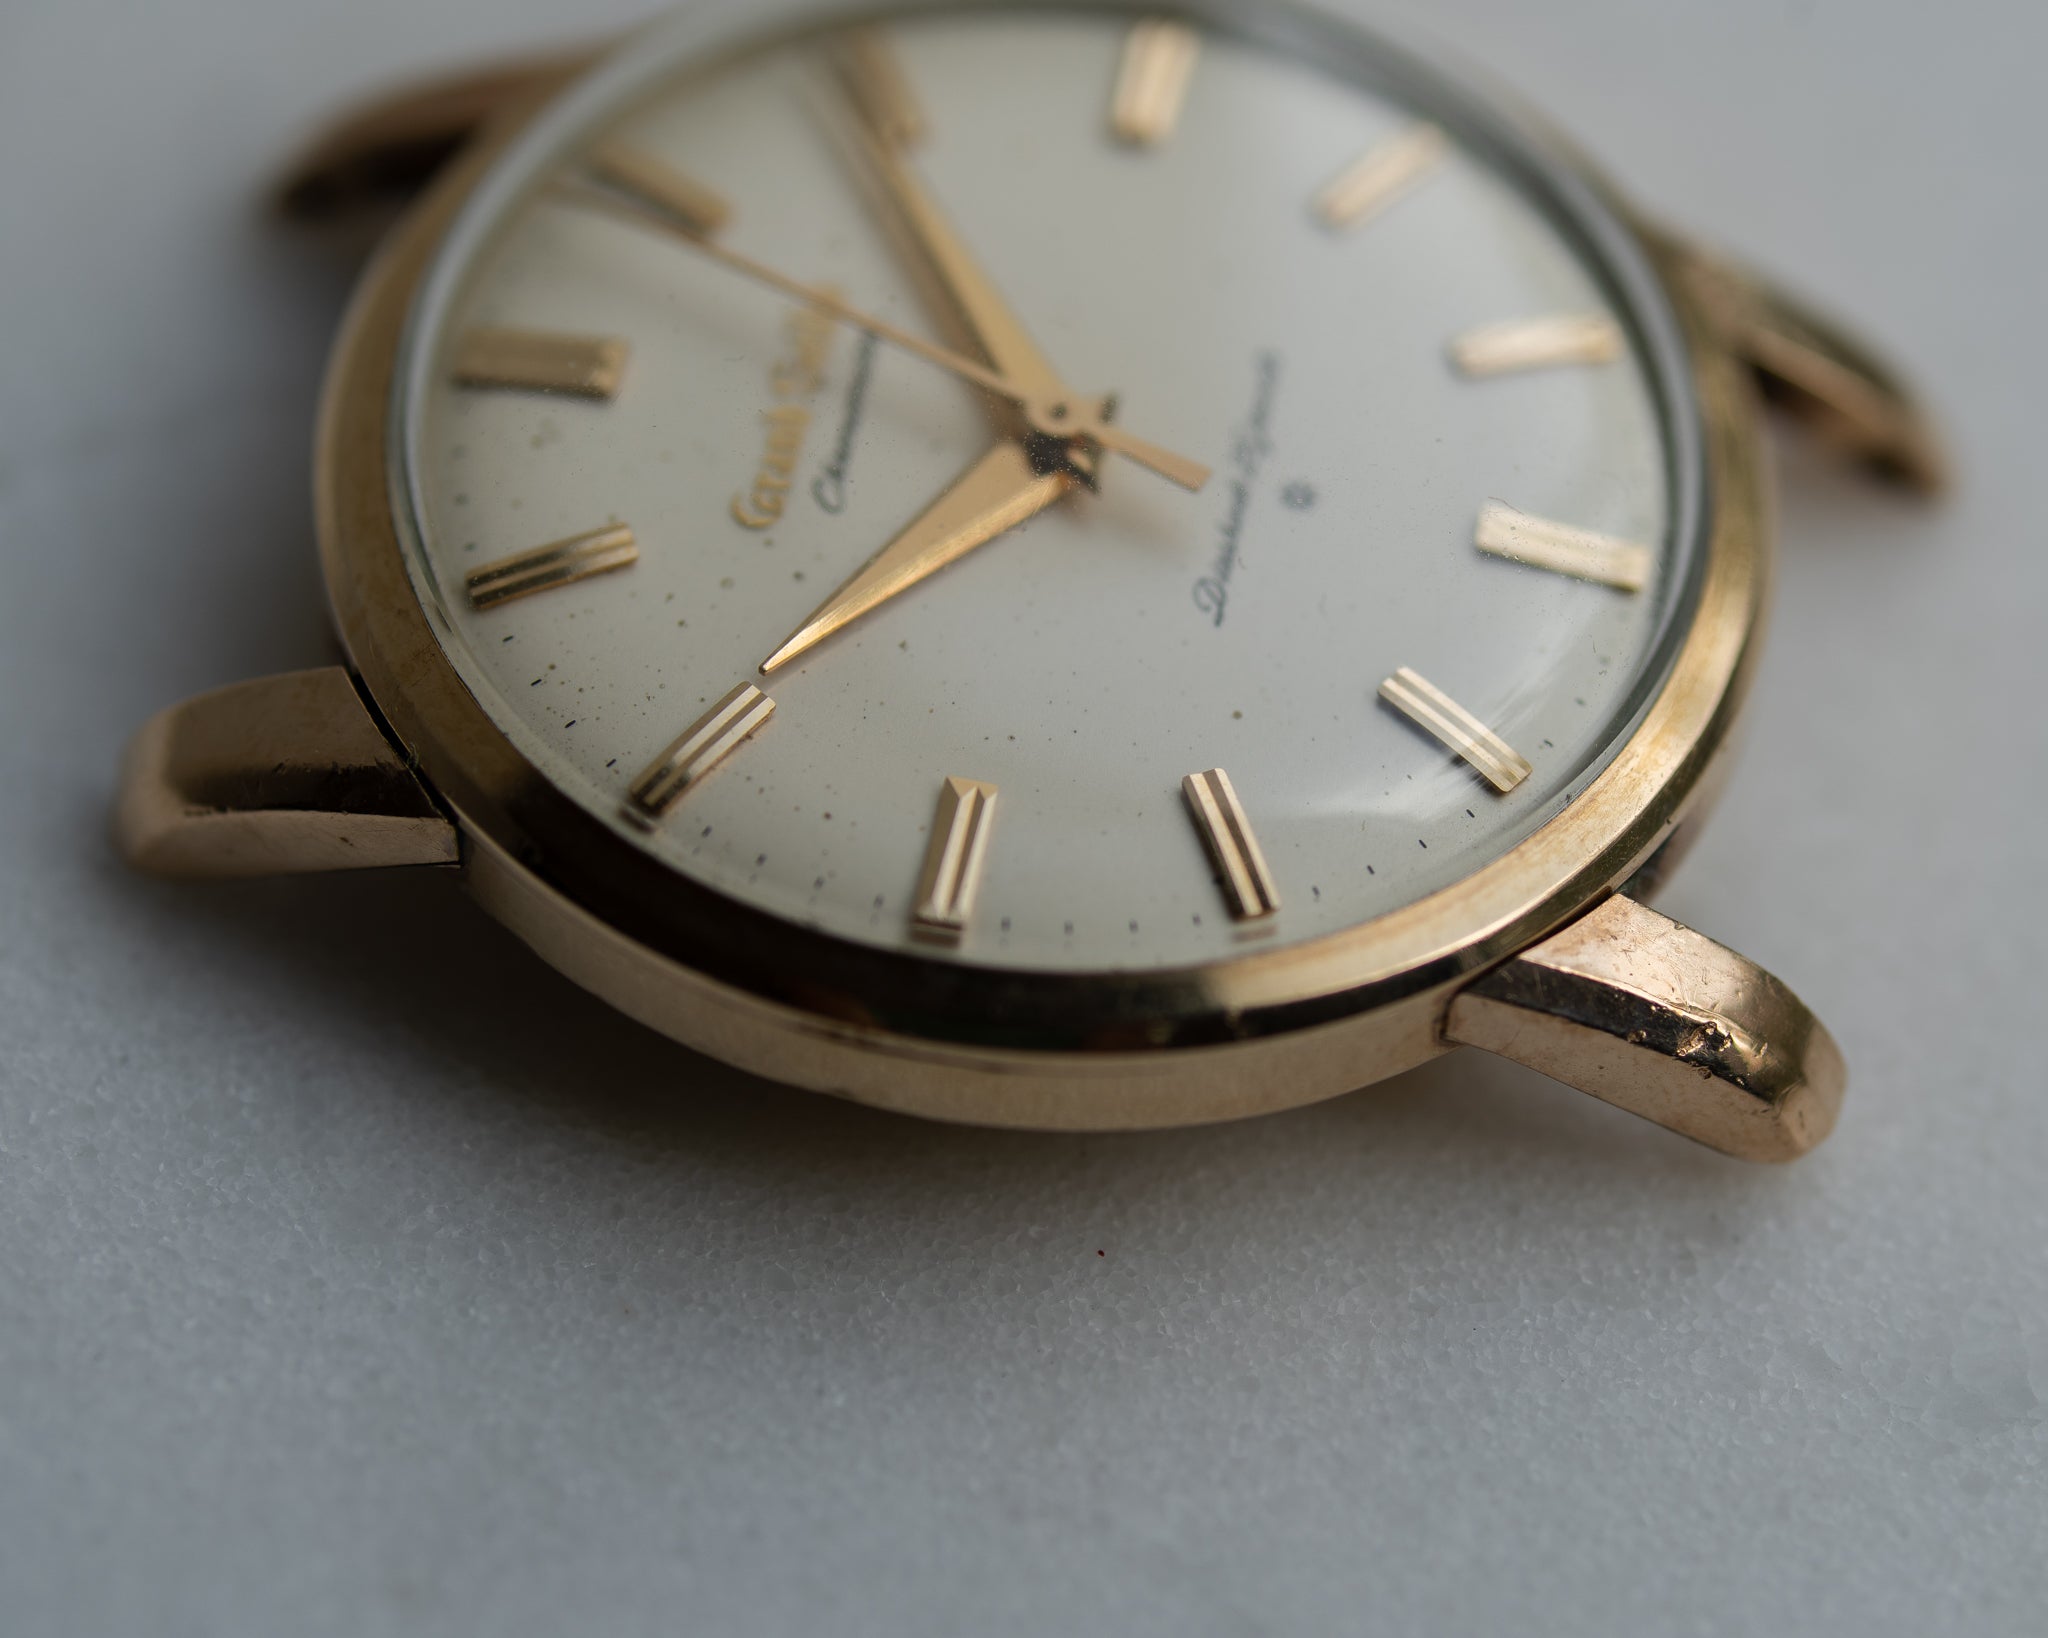 Grand Seiko First raised logo with original papers, December 1962 